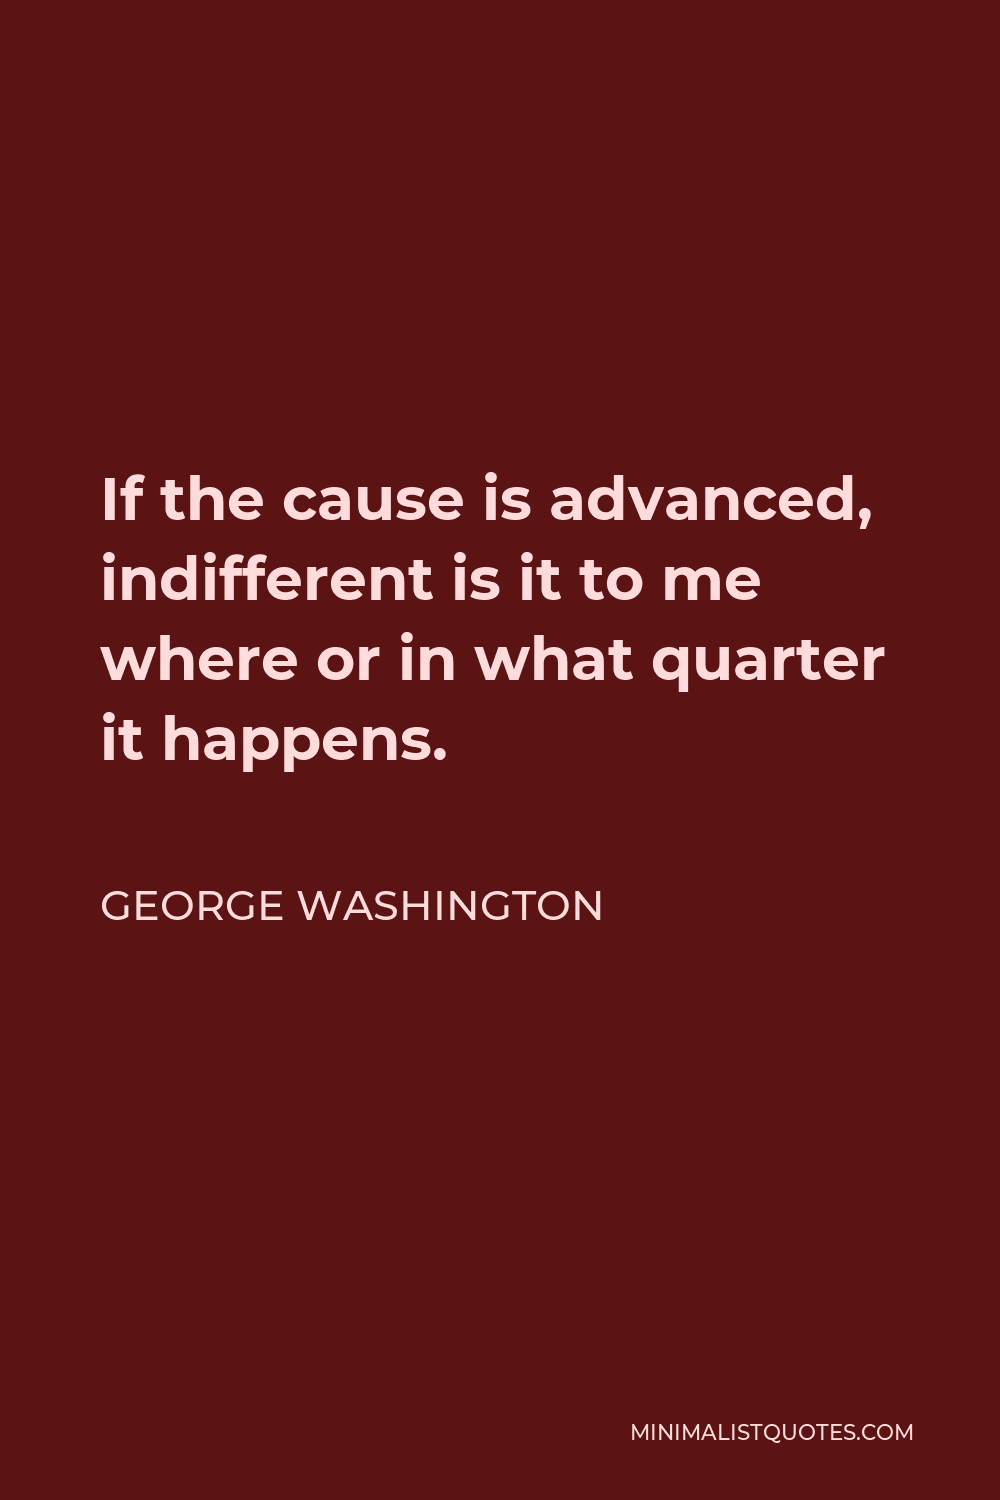 George Washington Quote - If the cause is advanced, indifferent is it to me where or in what quarter it happens.